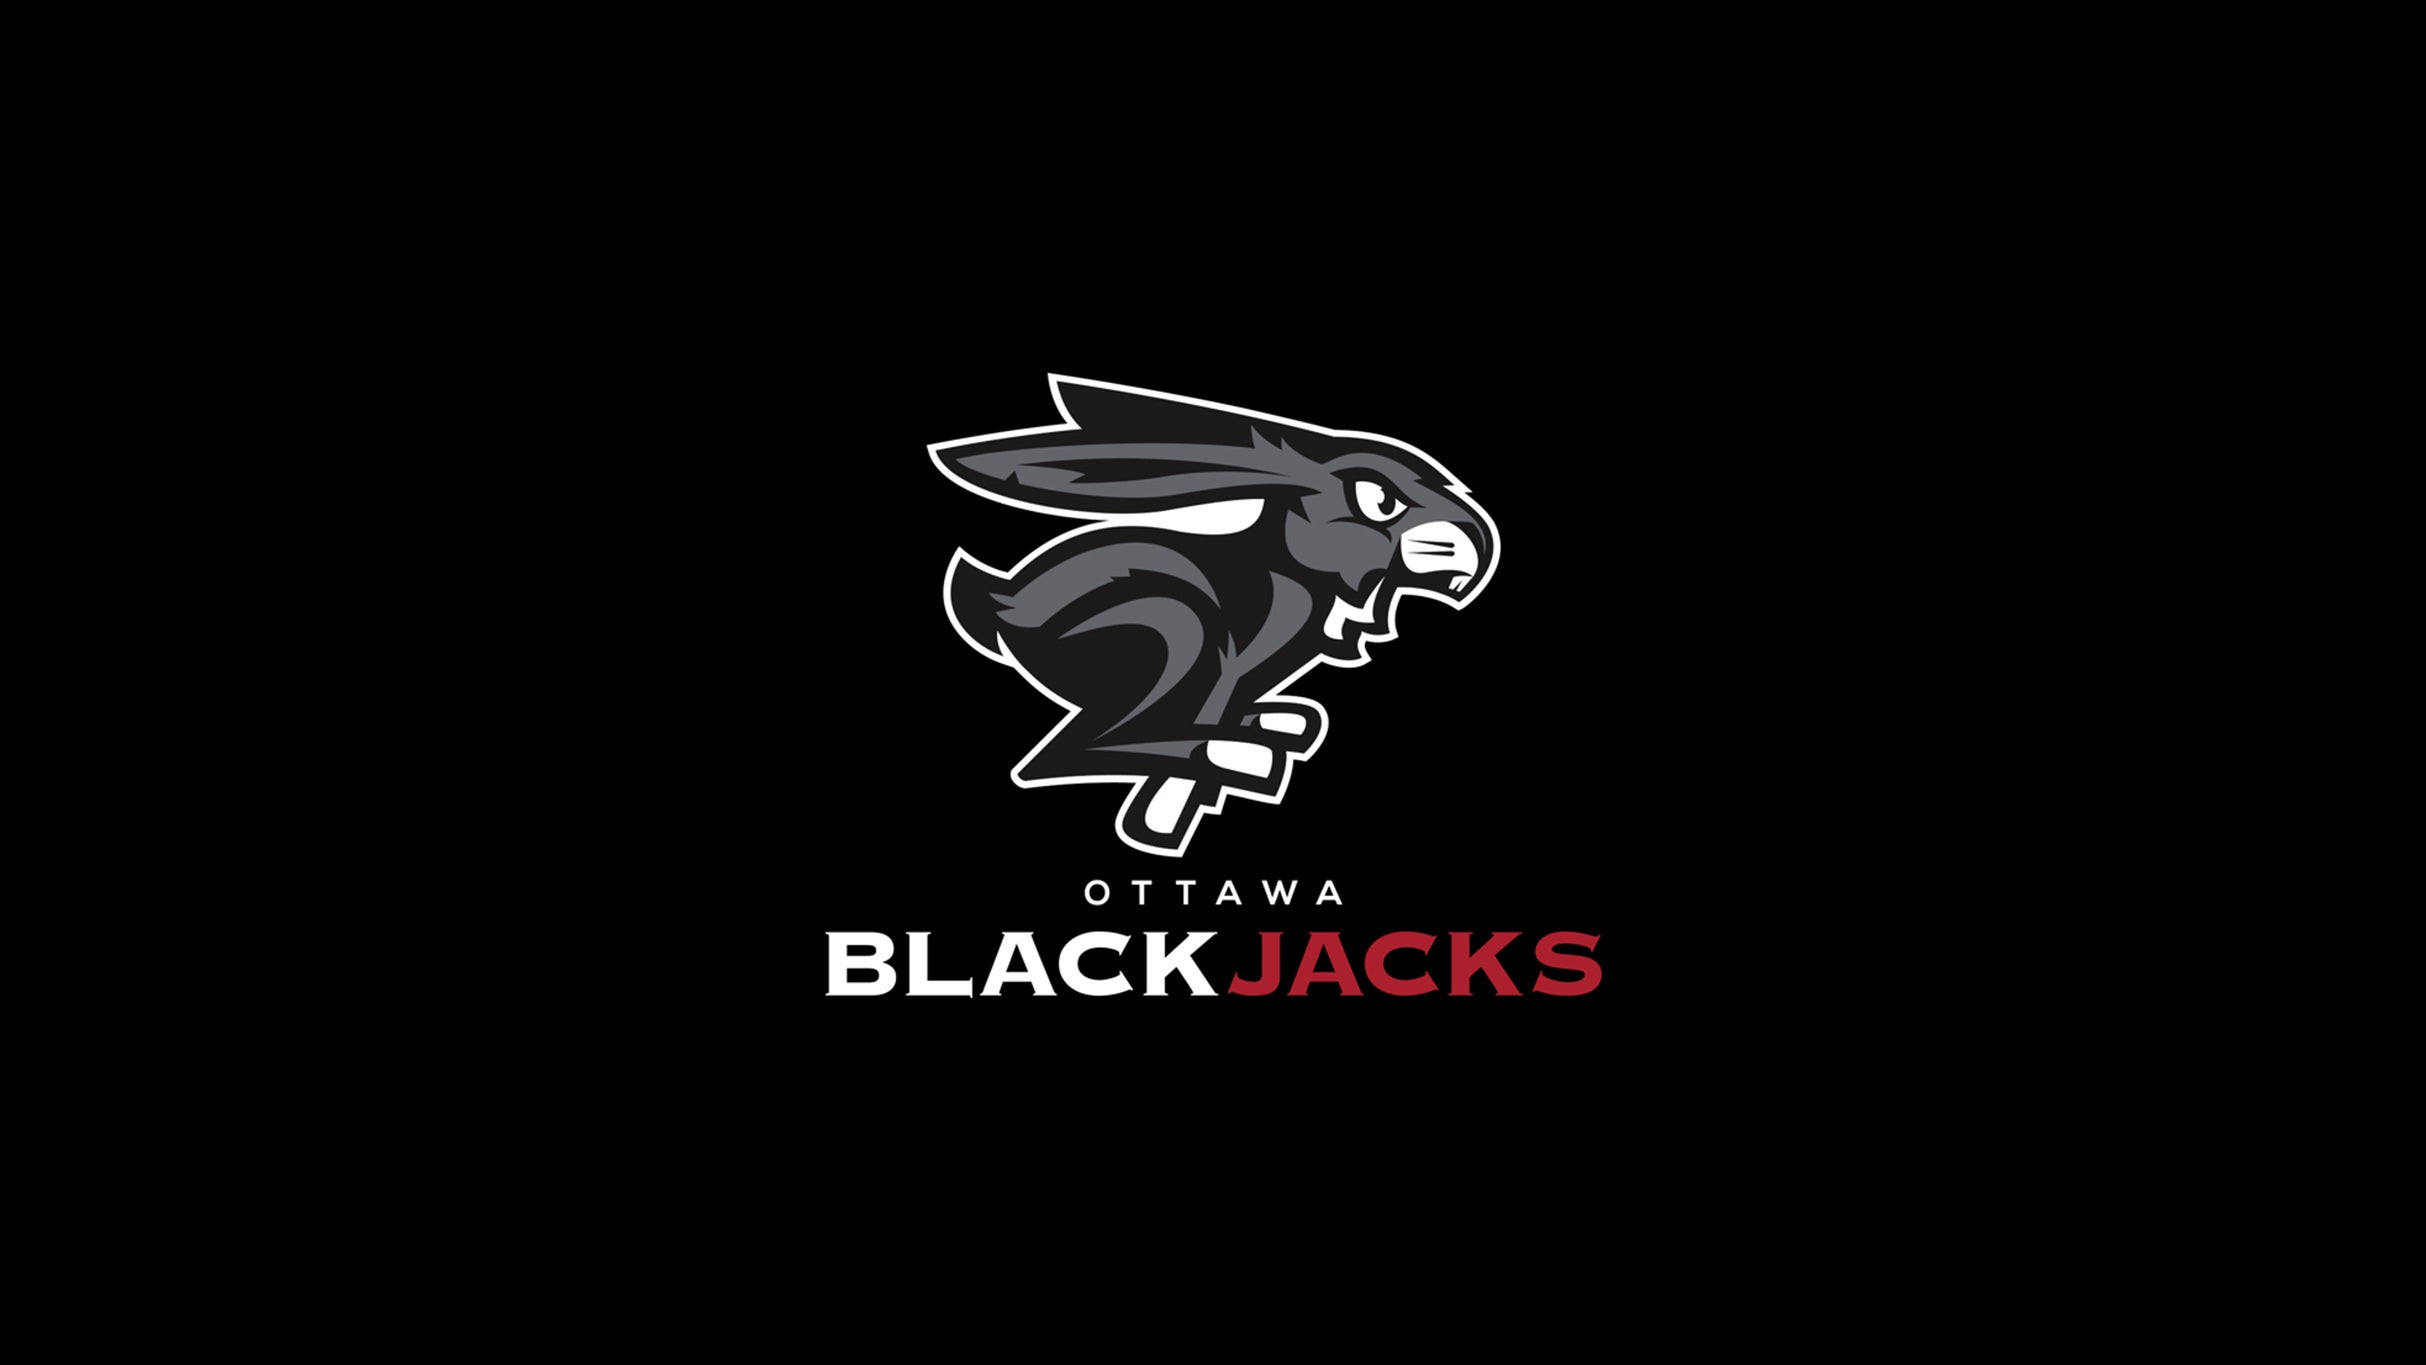 Ottawa BlackJacks vs. Montreal Alliance presale password for show tickets in Ottawa, ON (The Arena at TD Place)